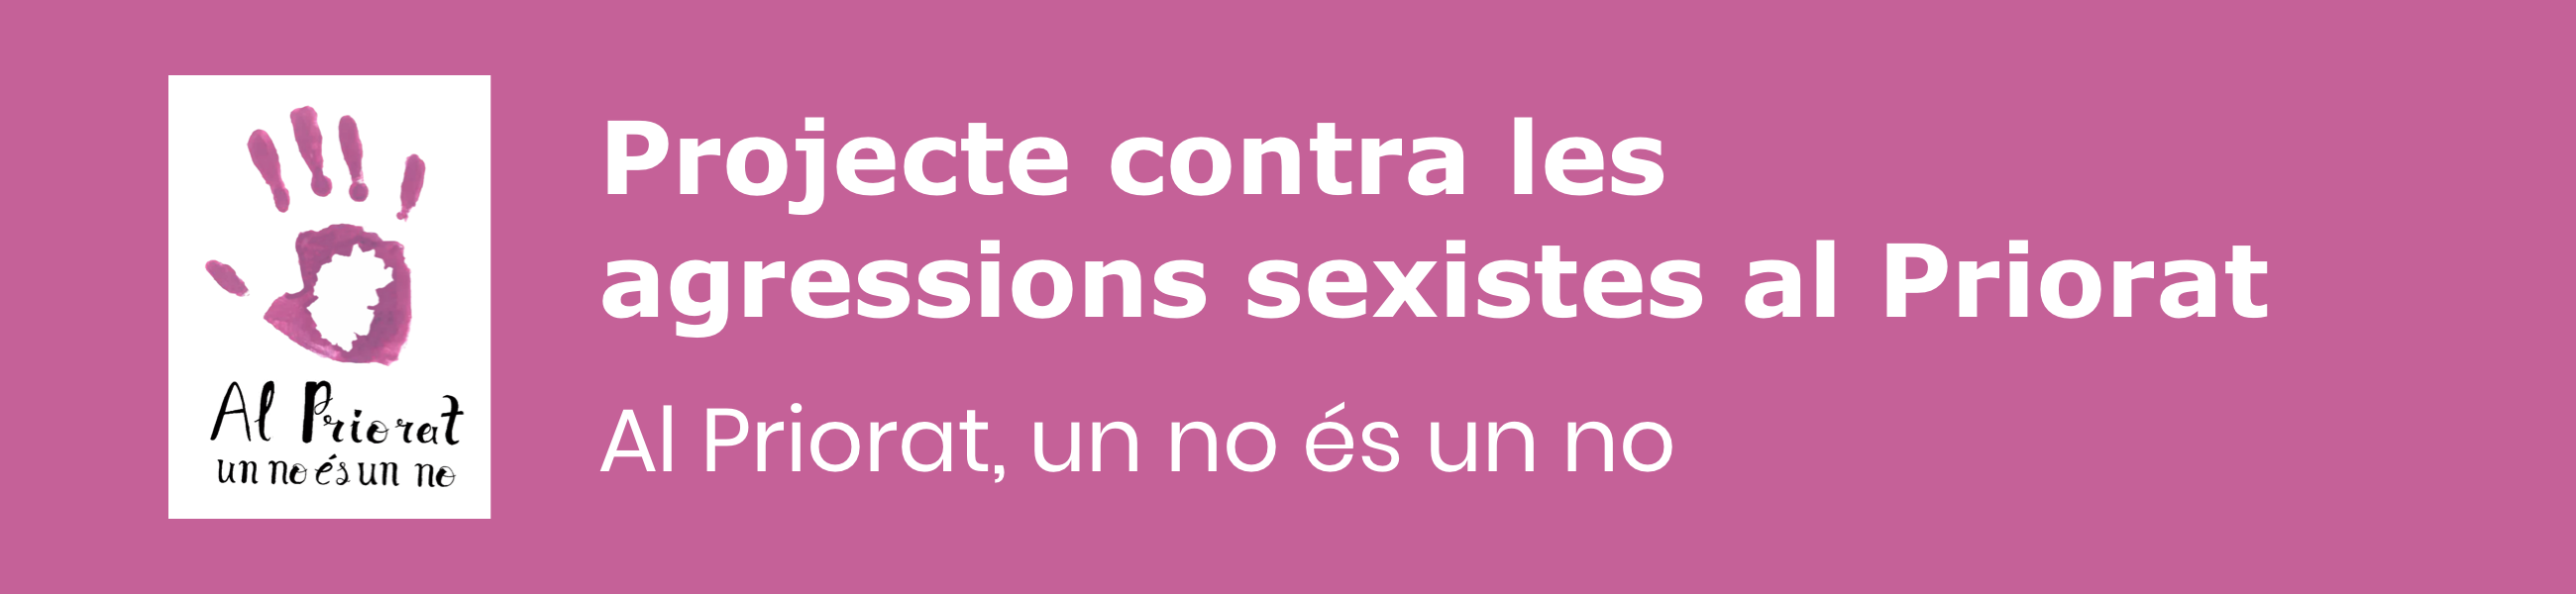 No agressions sexistes